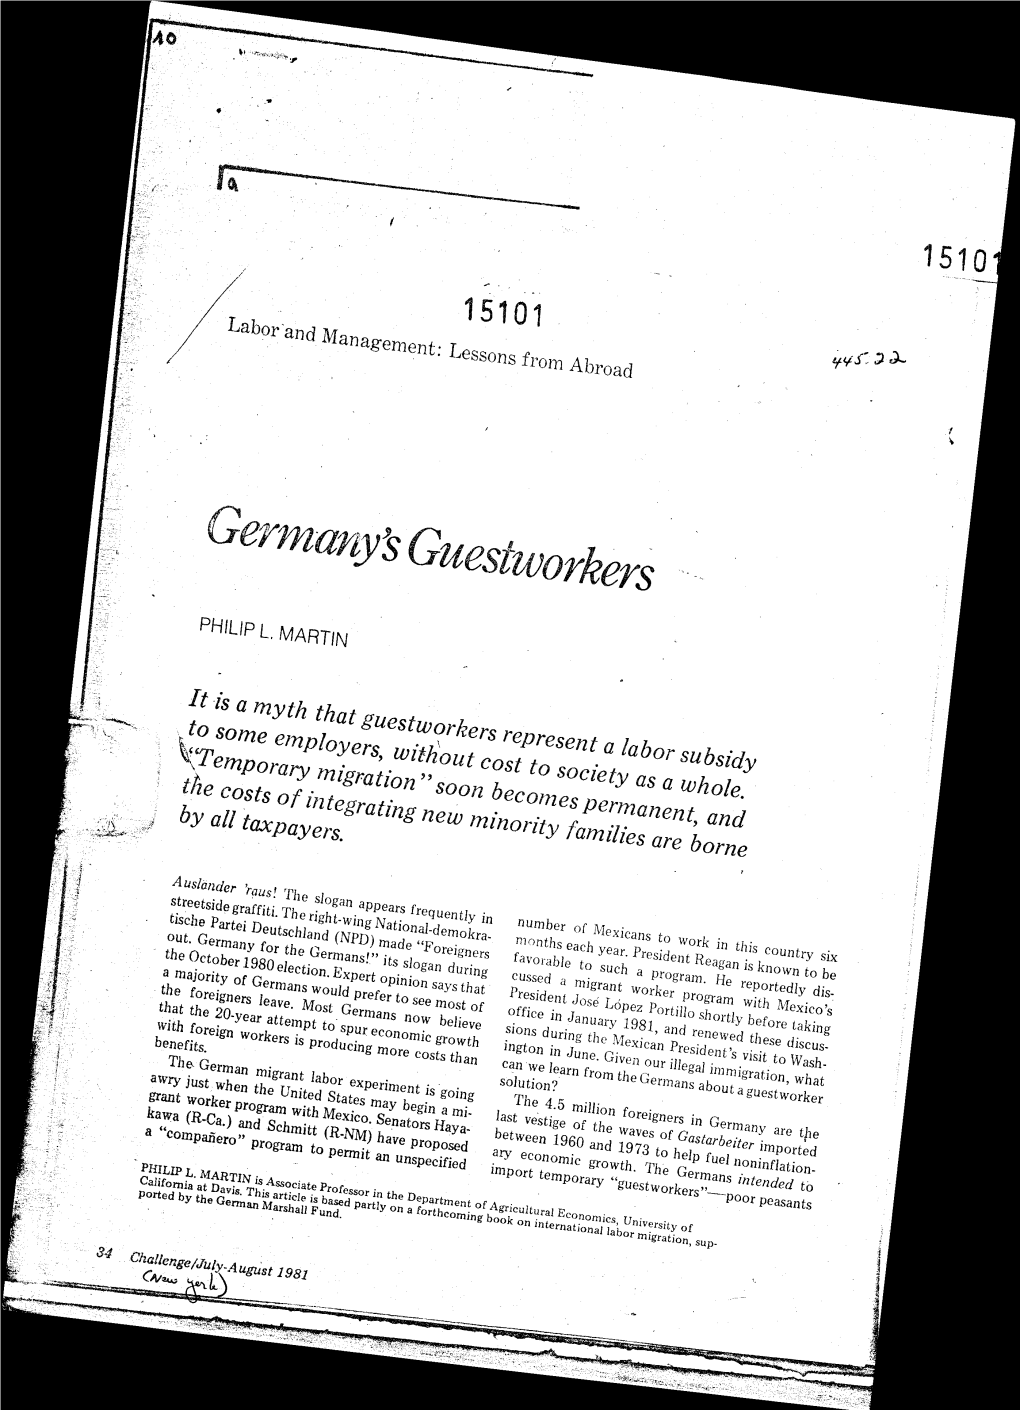 Germany's Guestworkers